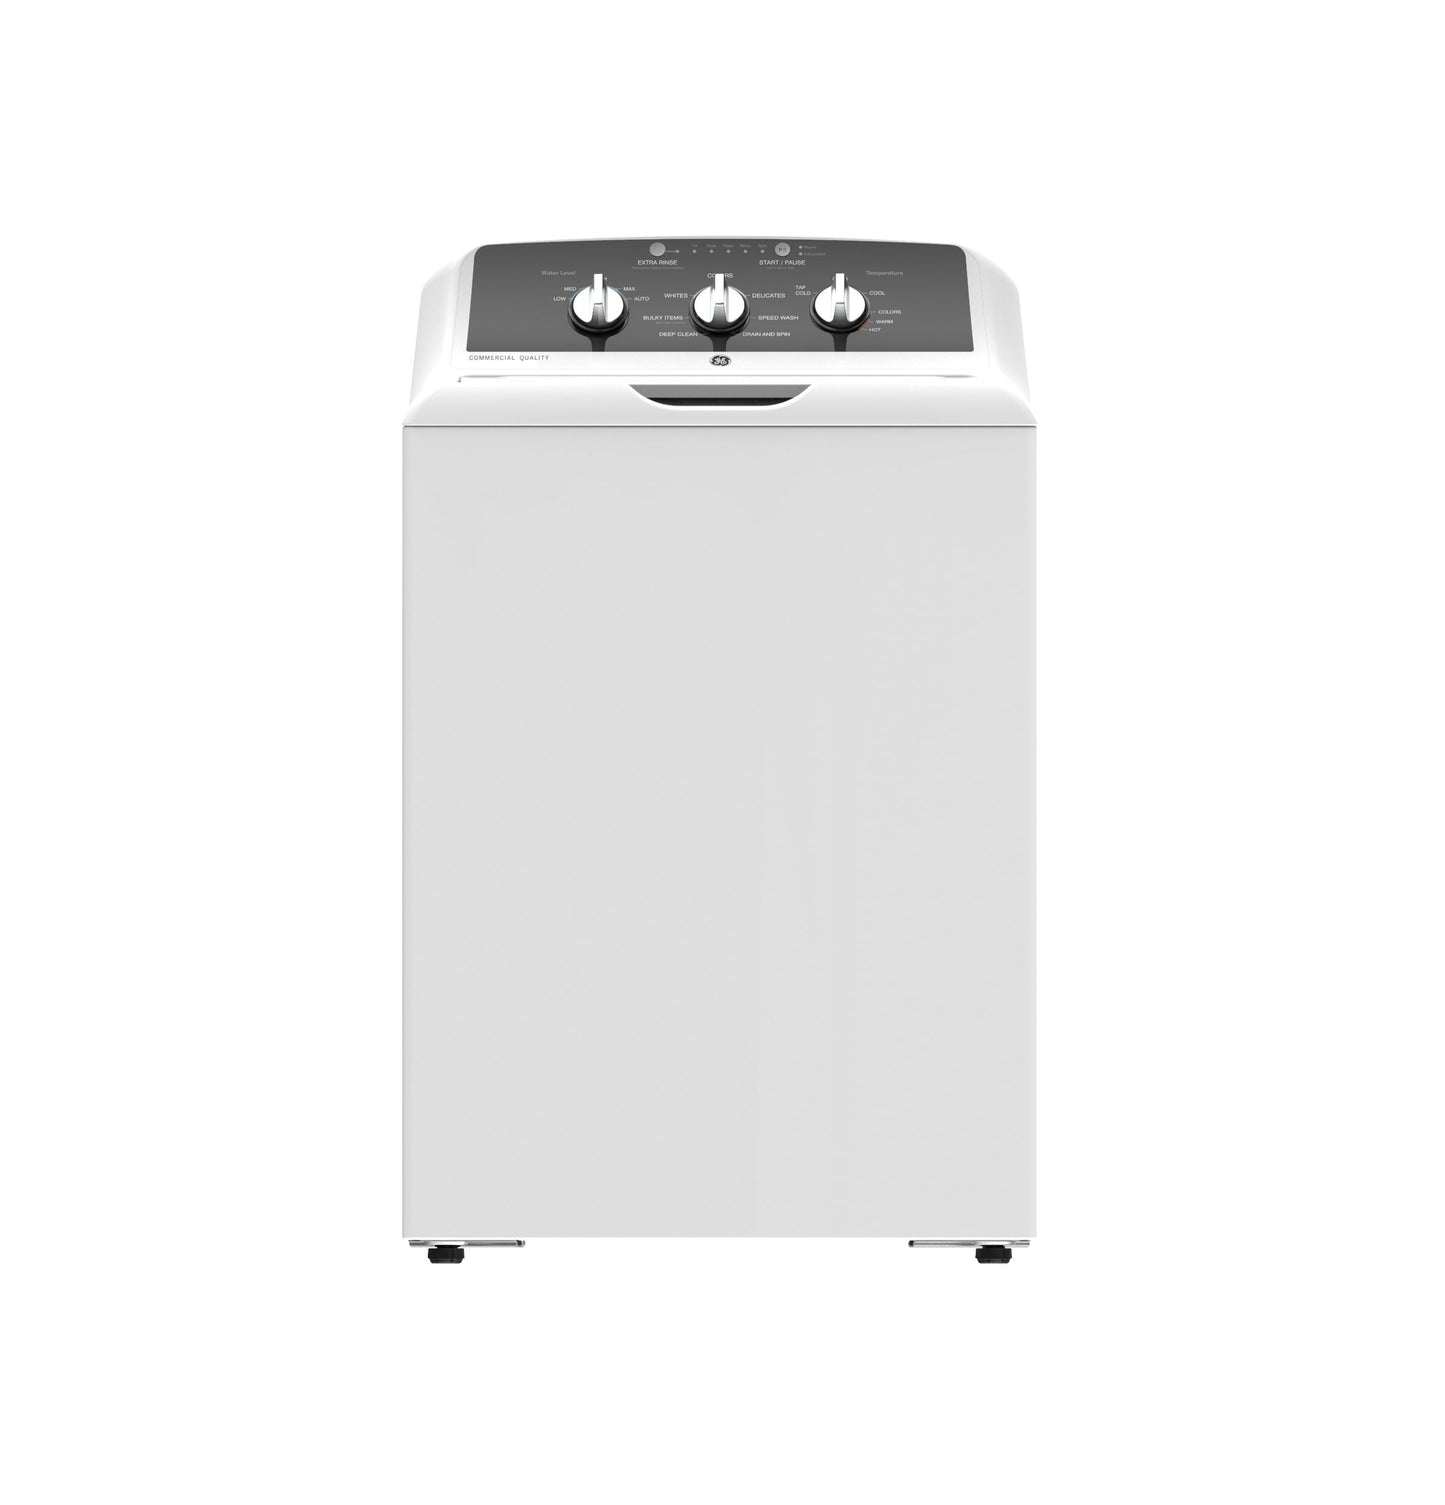 Ge Appliances GTW525ACPWB Ge® 4.2 Cu. Ft. Capacity Washer With Stainless Steel Basket